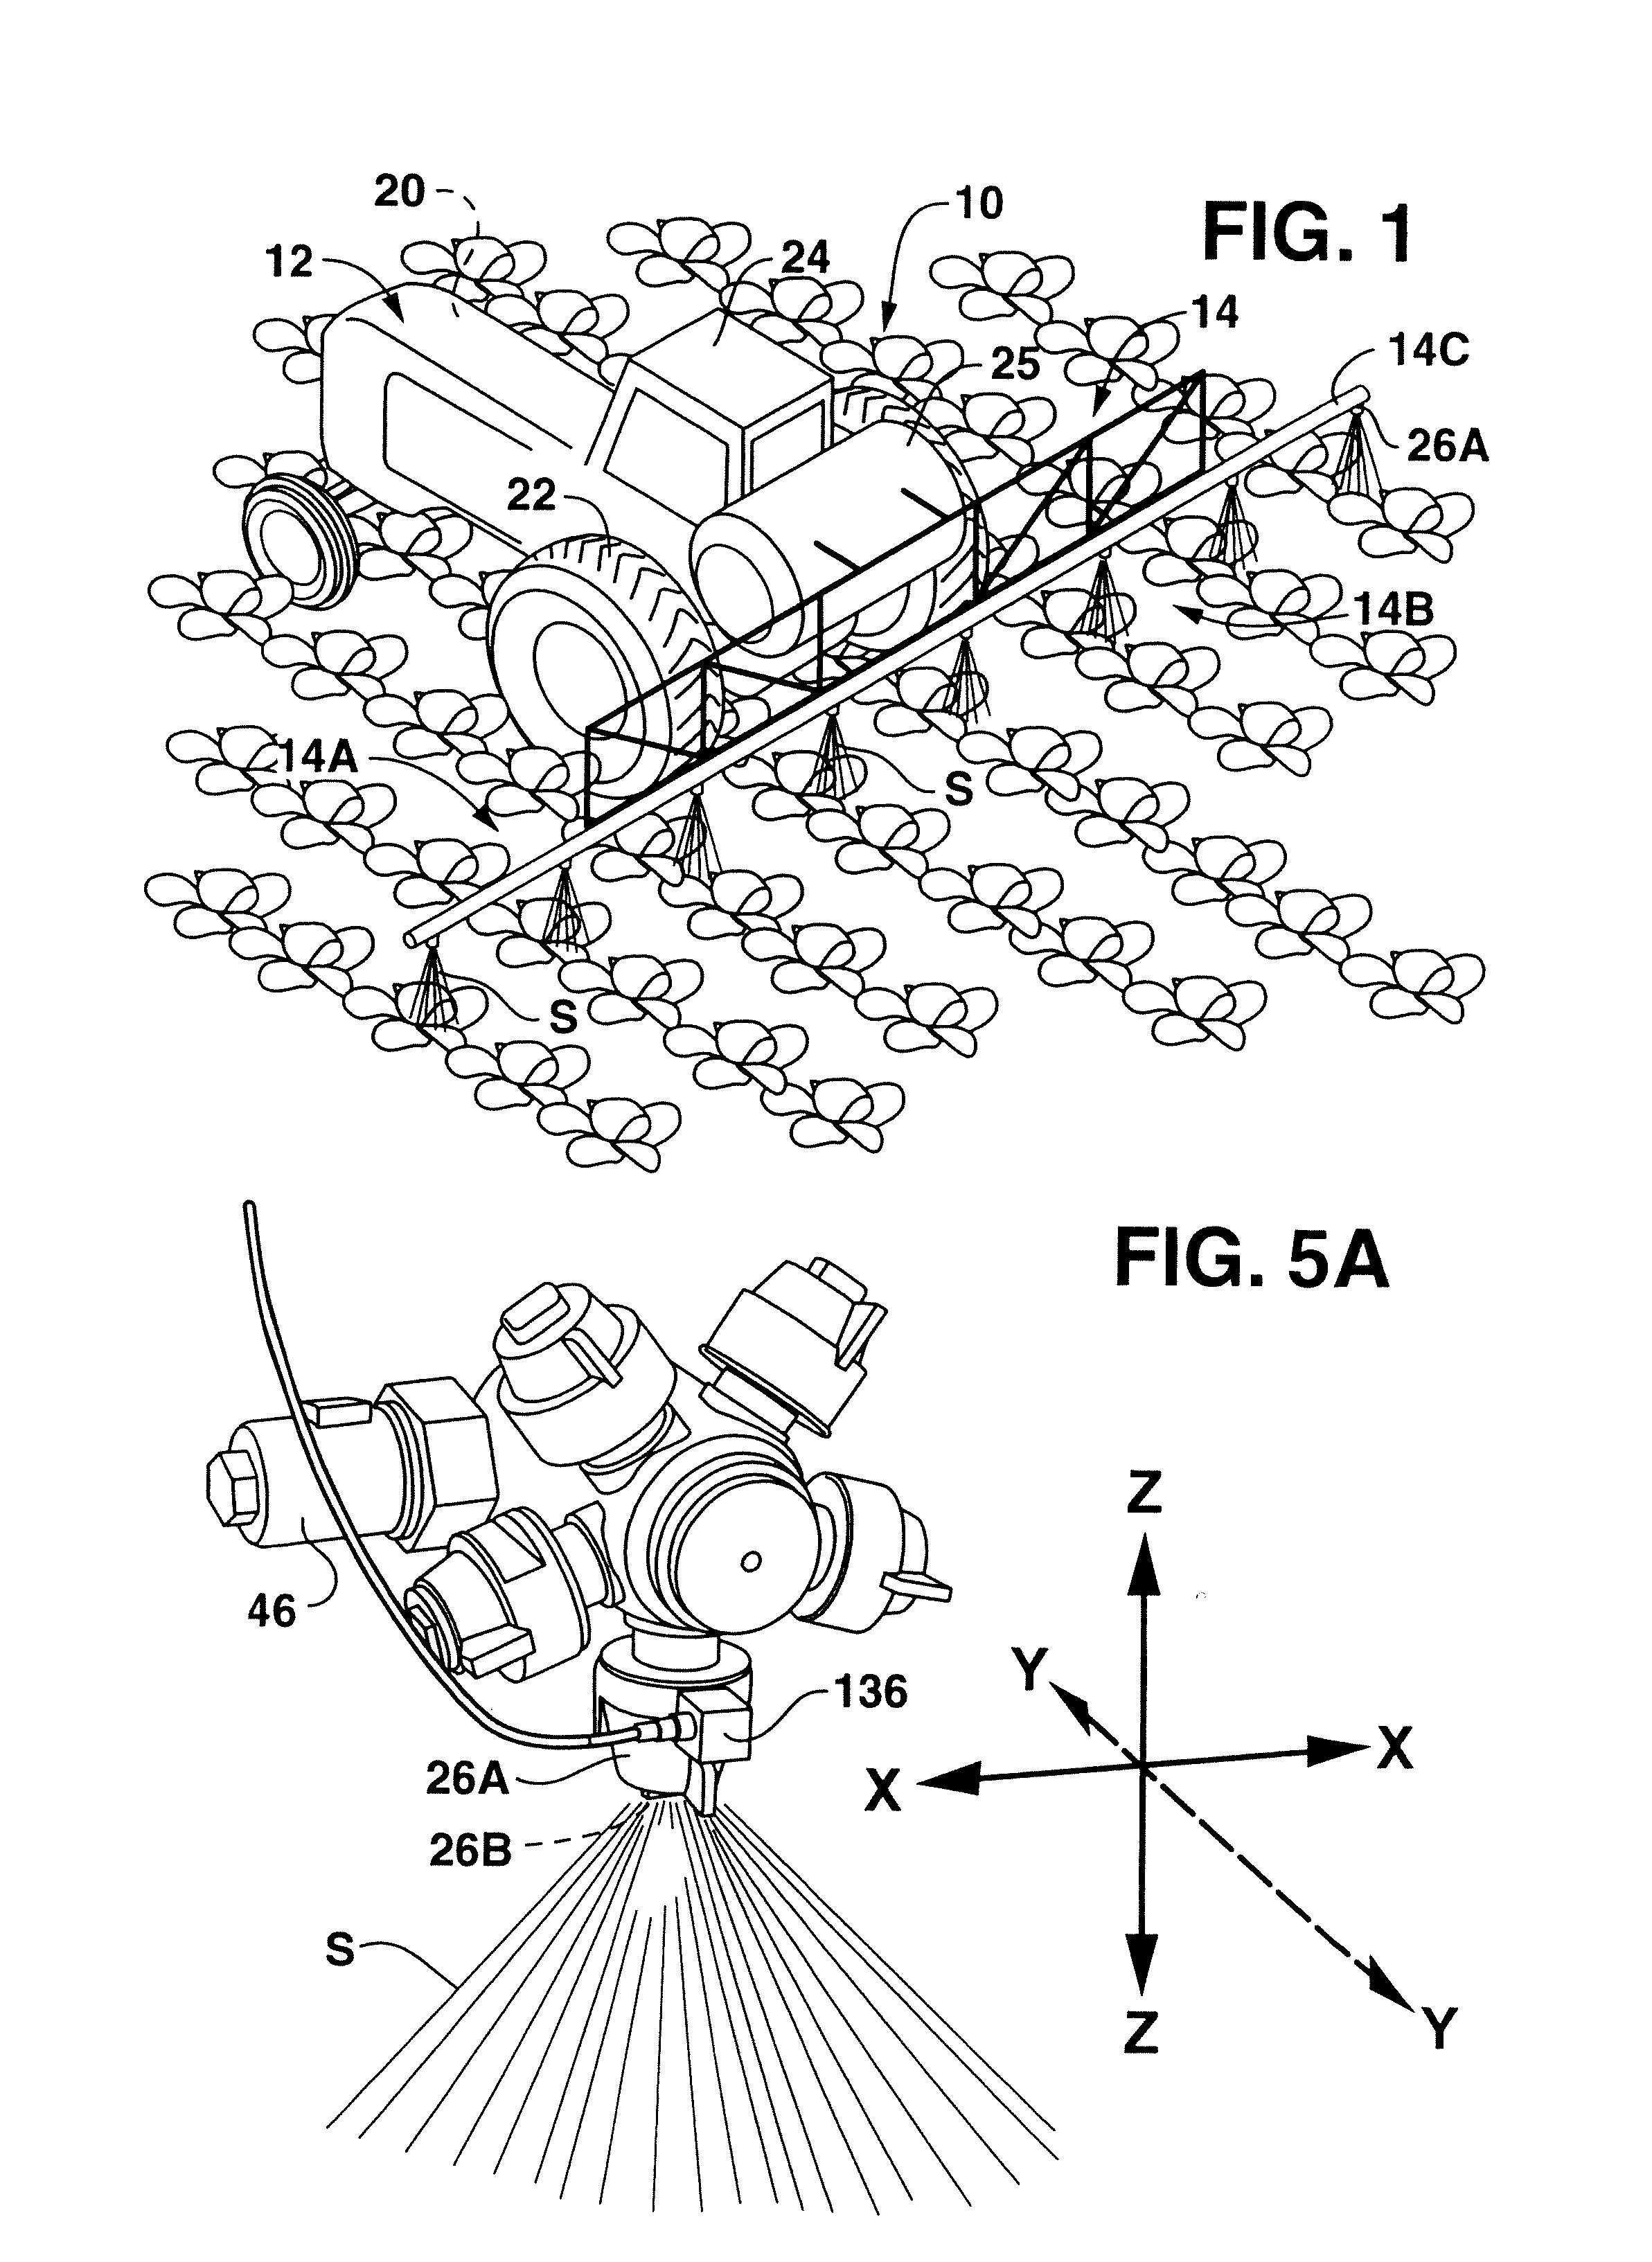 Networked Diagnostic and Control System for Dispensing Apparatus